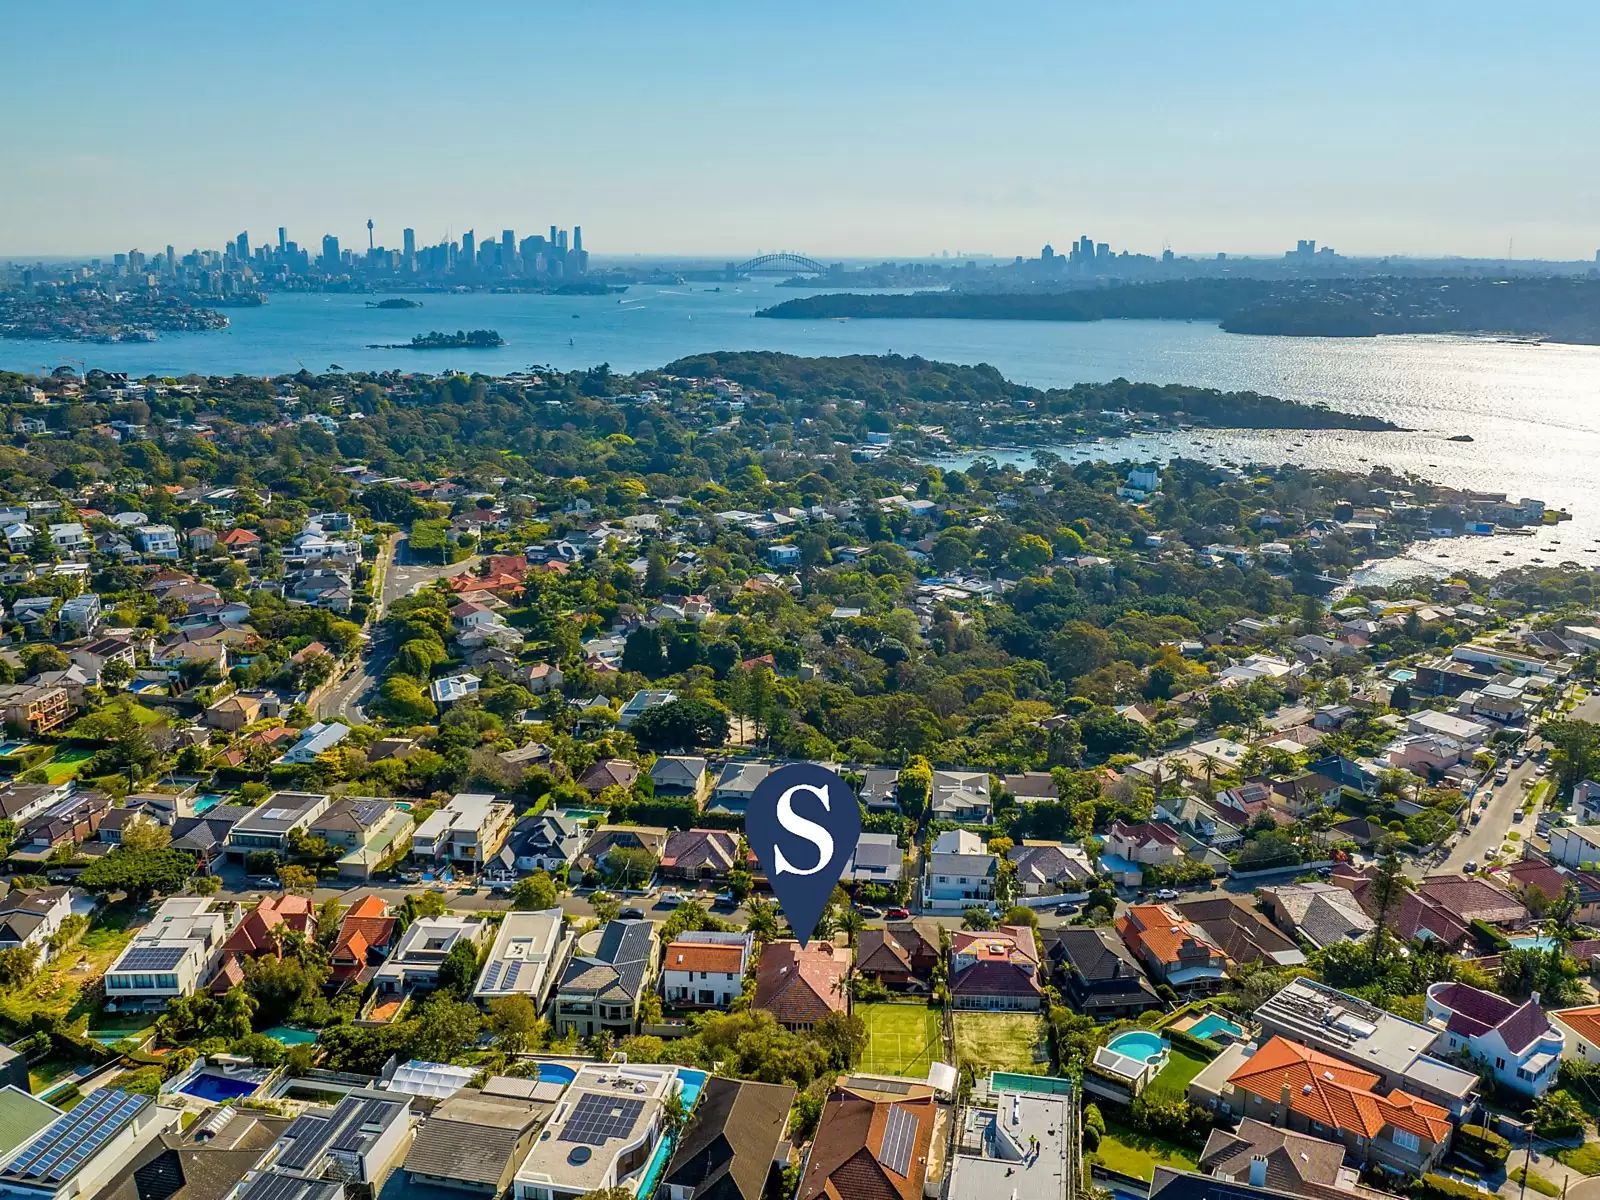 Photo #4: 23 Village High Road, Vaucluse - Sold by Sydney Sotheby's International Realty